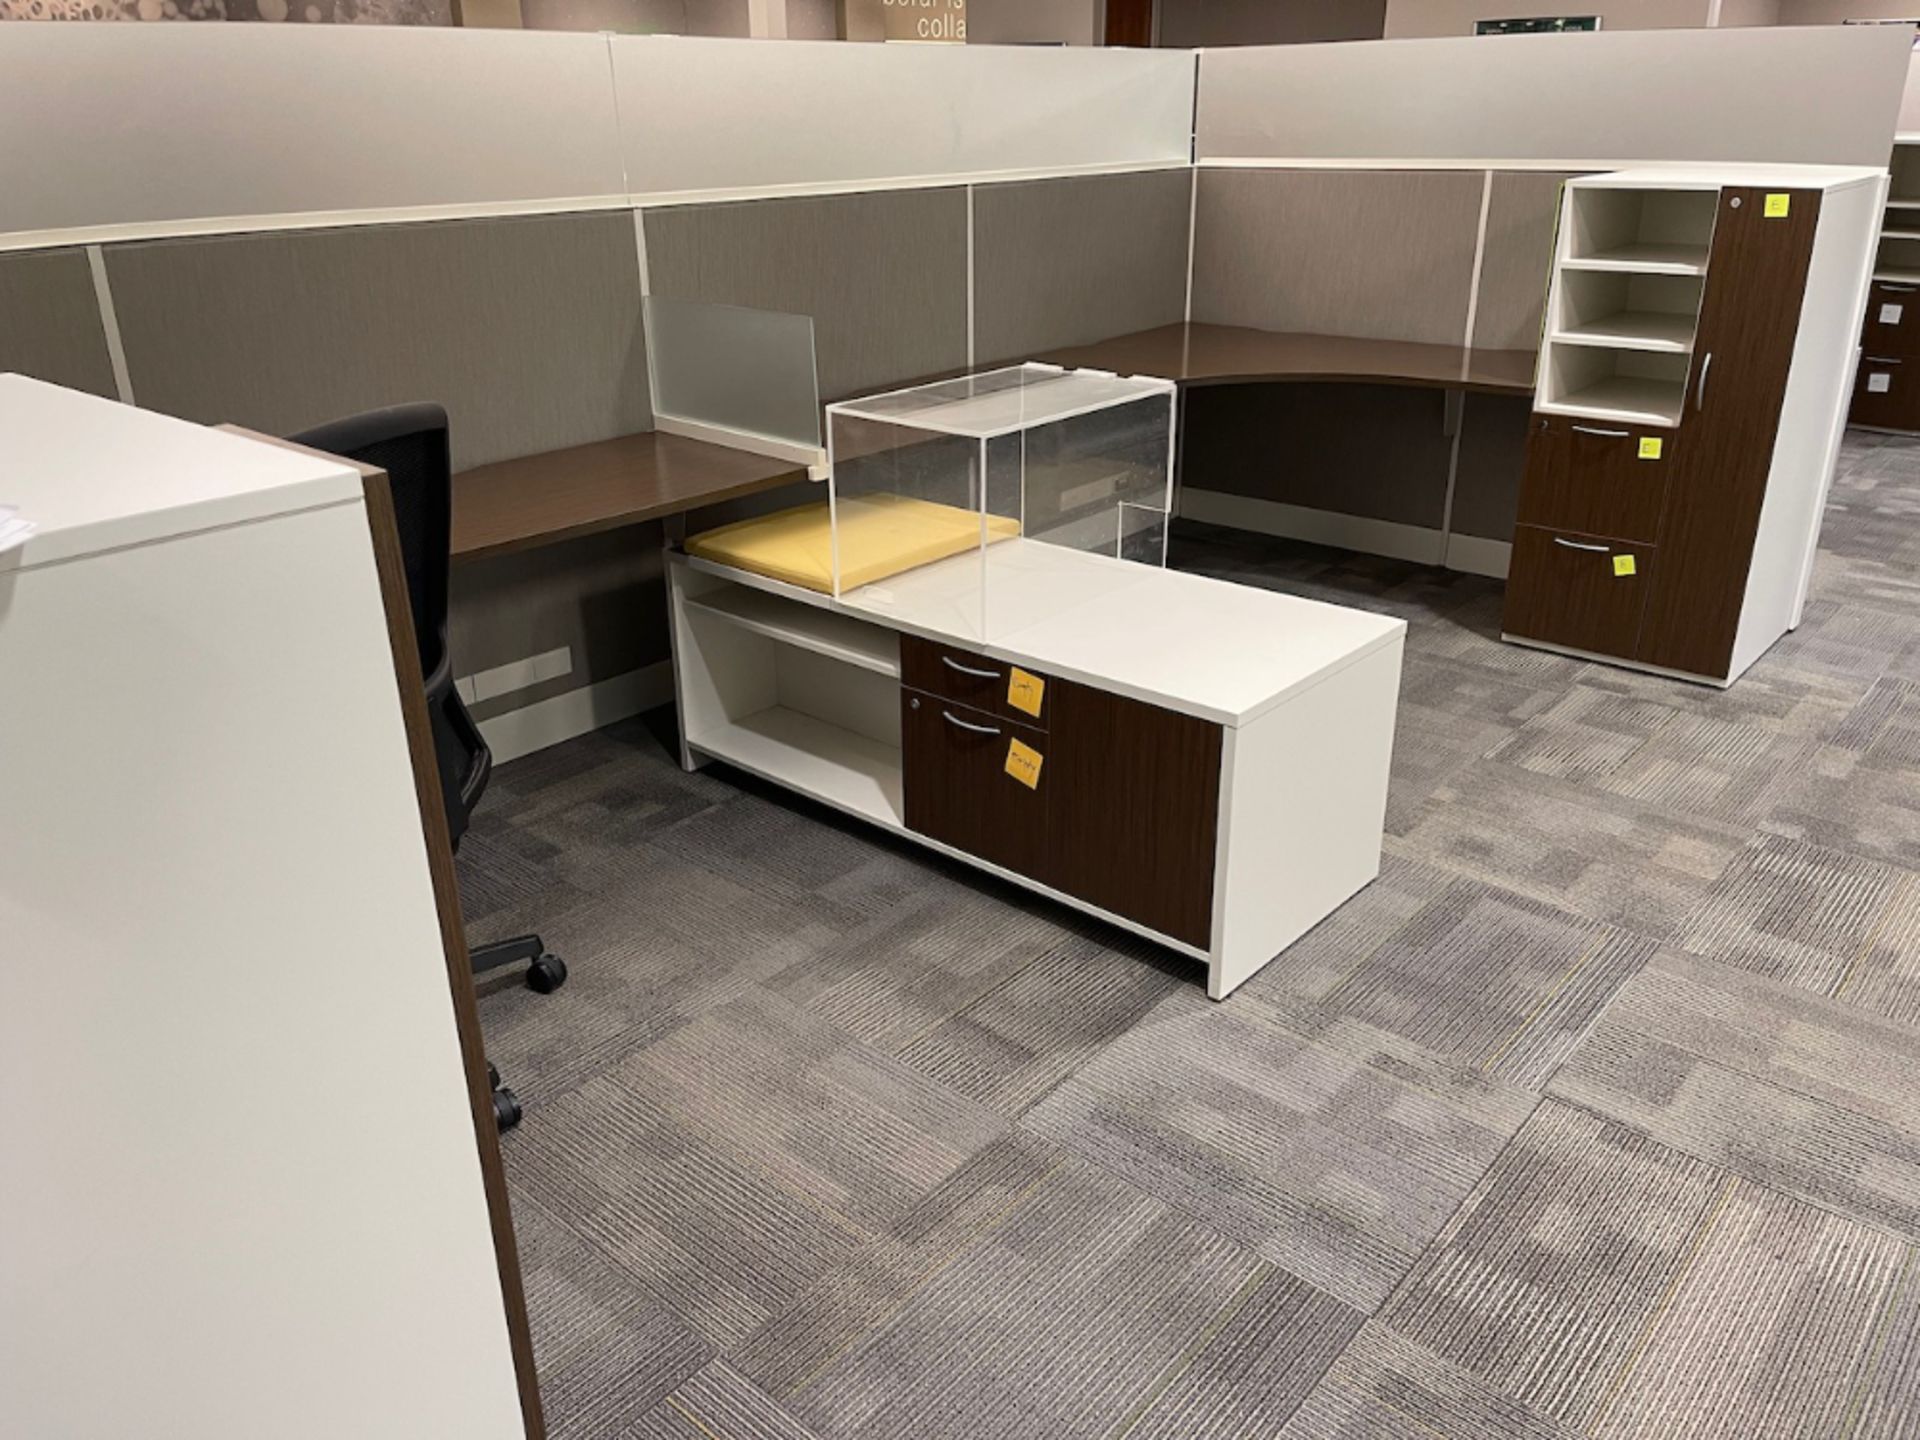 Office Cubicles - 25 - Image 9 of 27